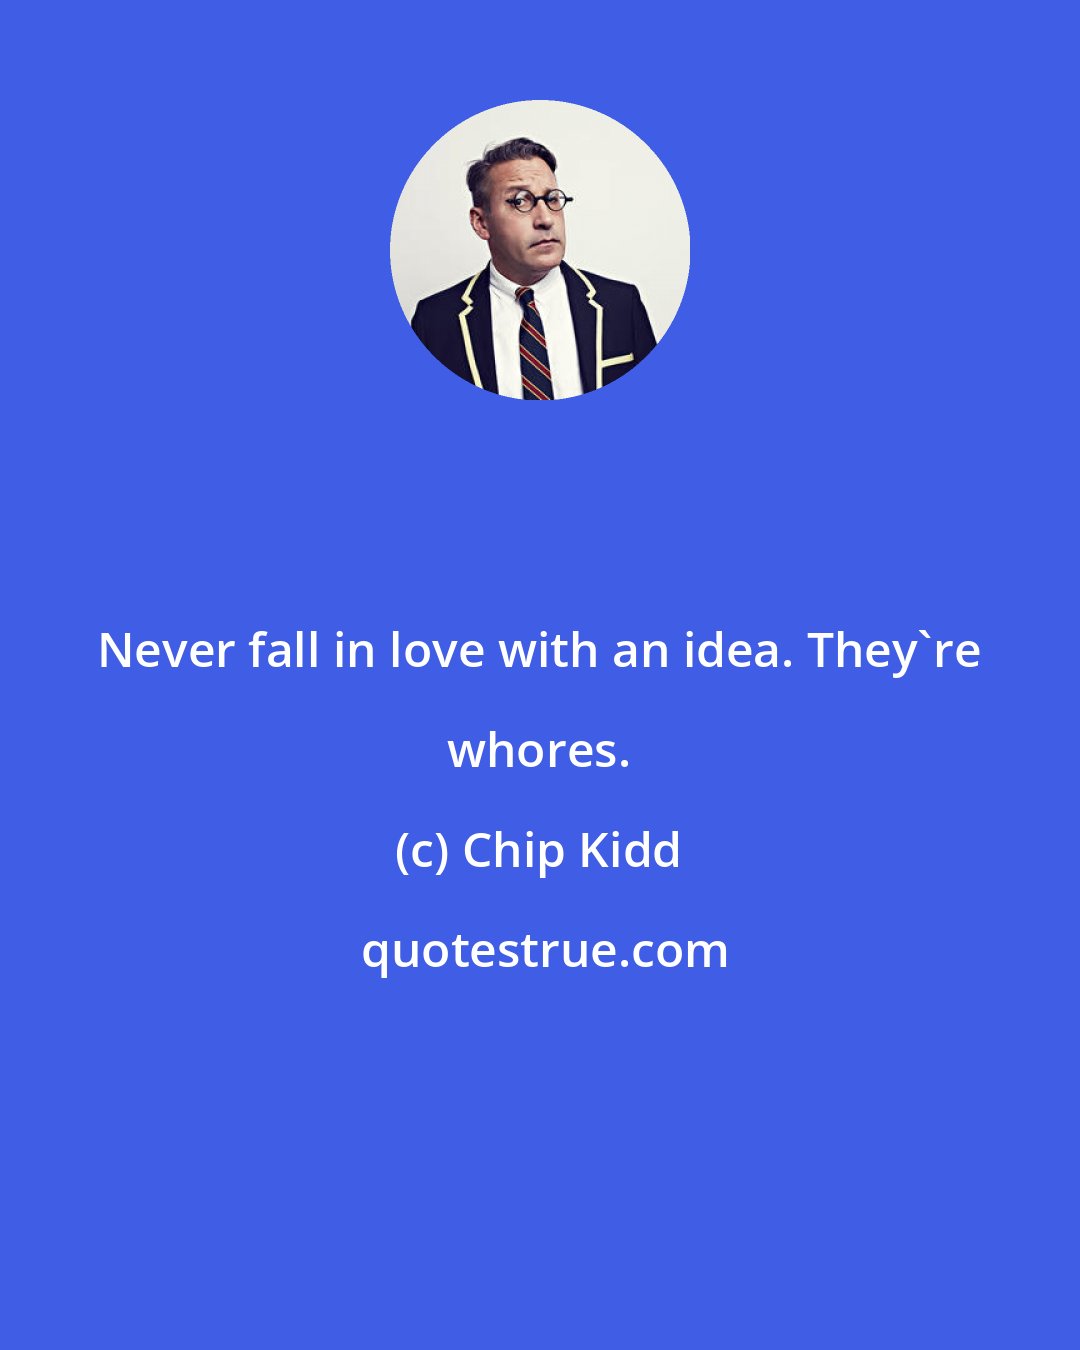 Chip Kidd: Never fall in love with an idea. They're whores.